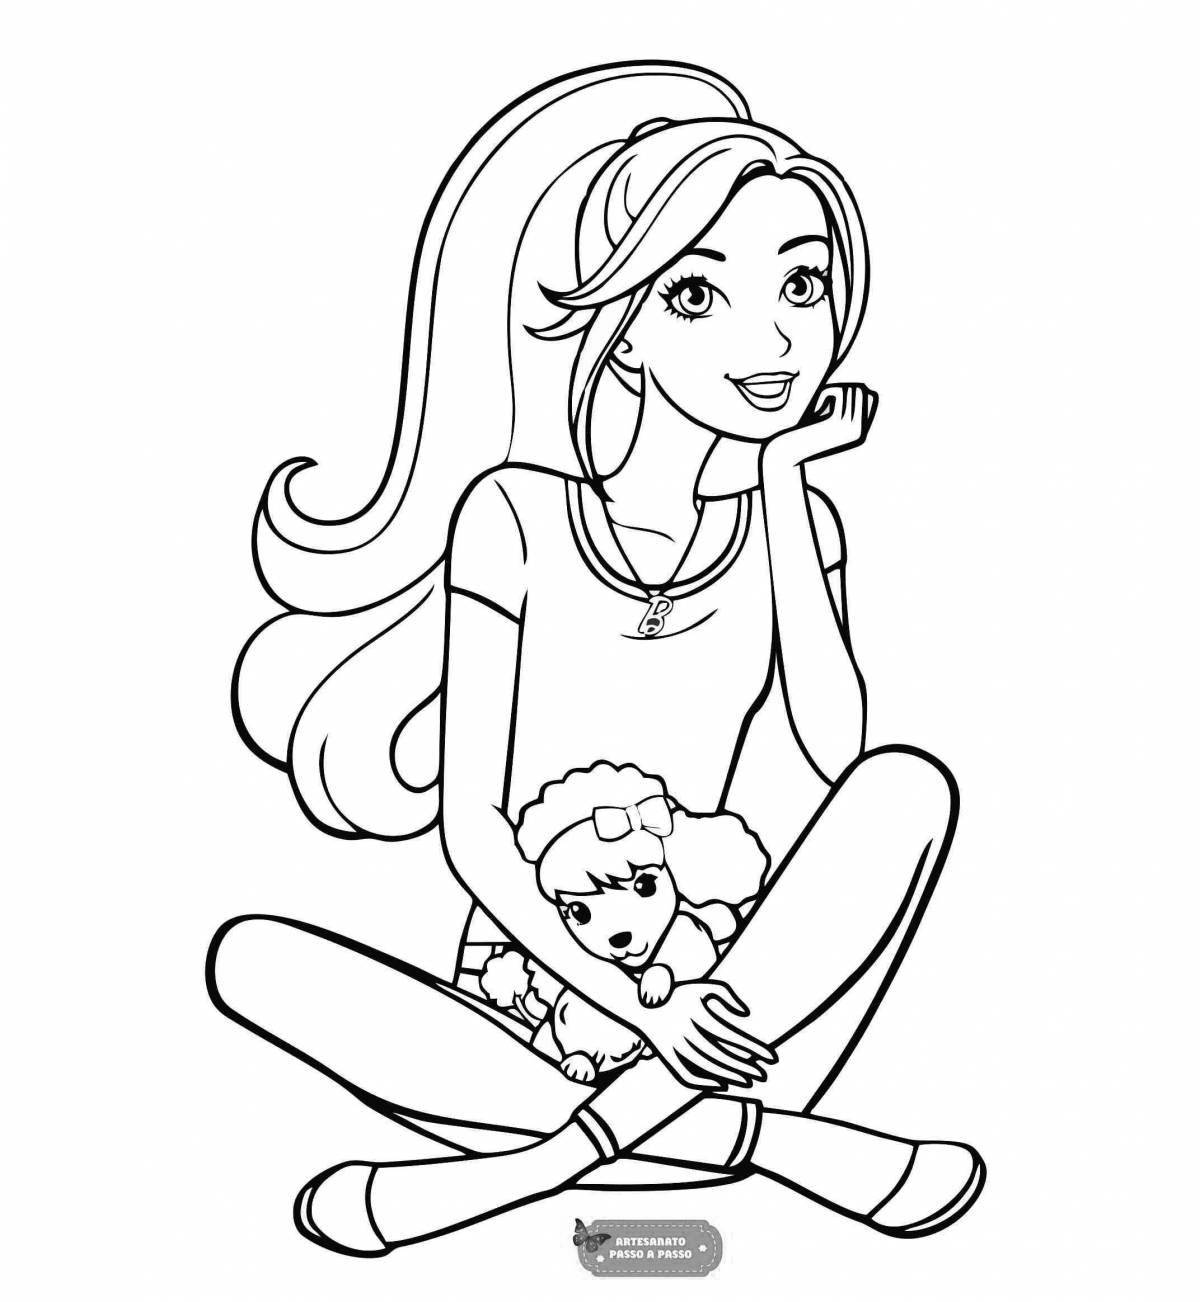 Animated chelsea coloring page